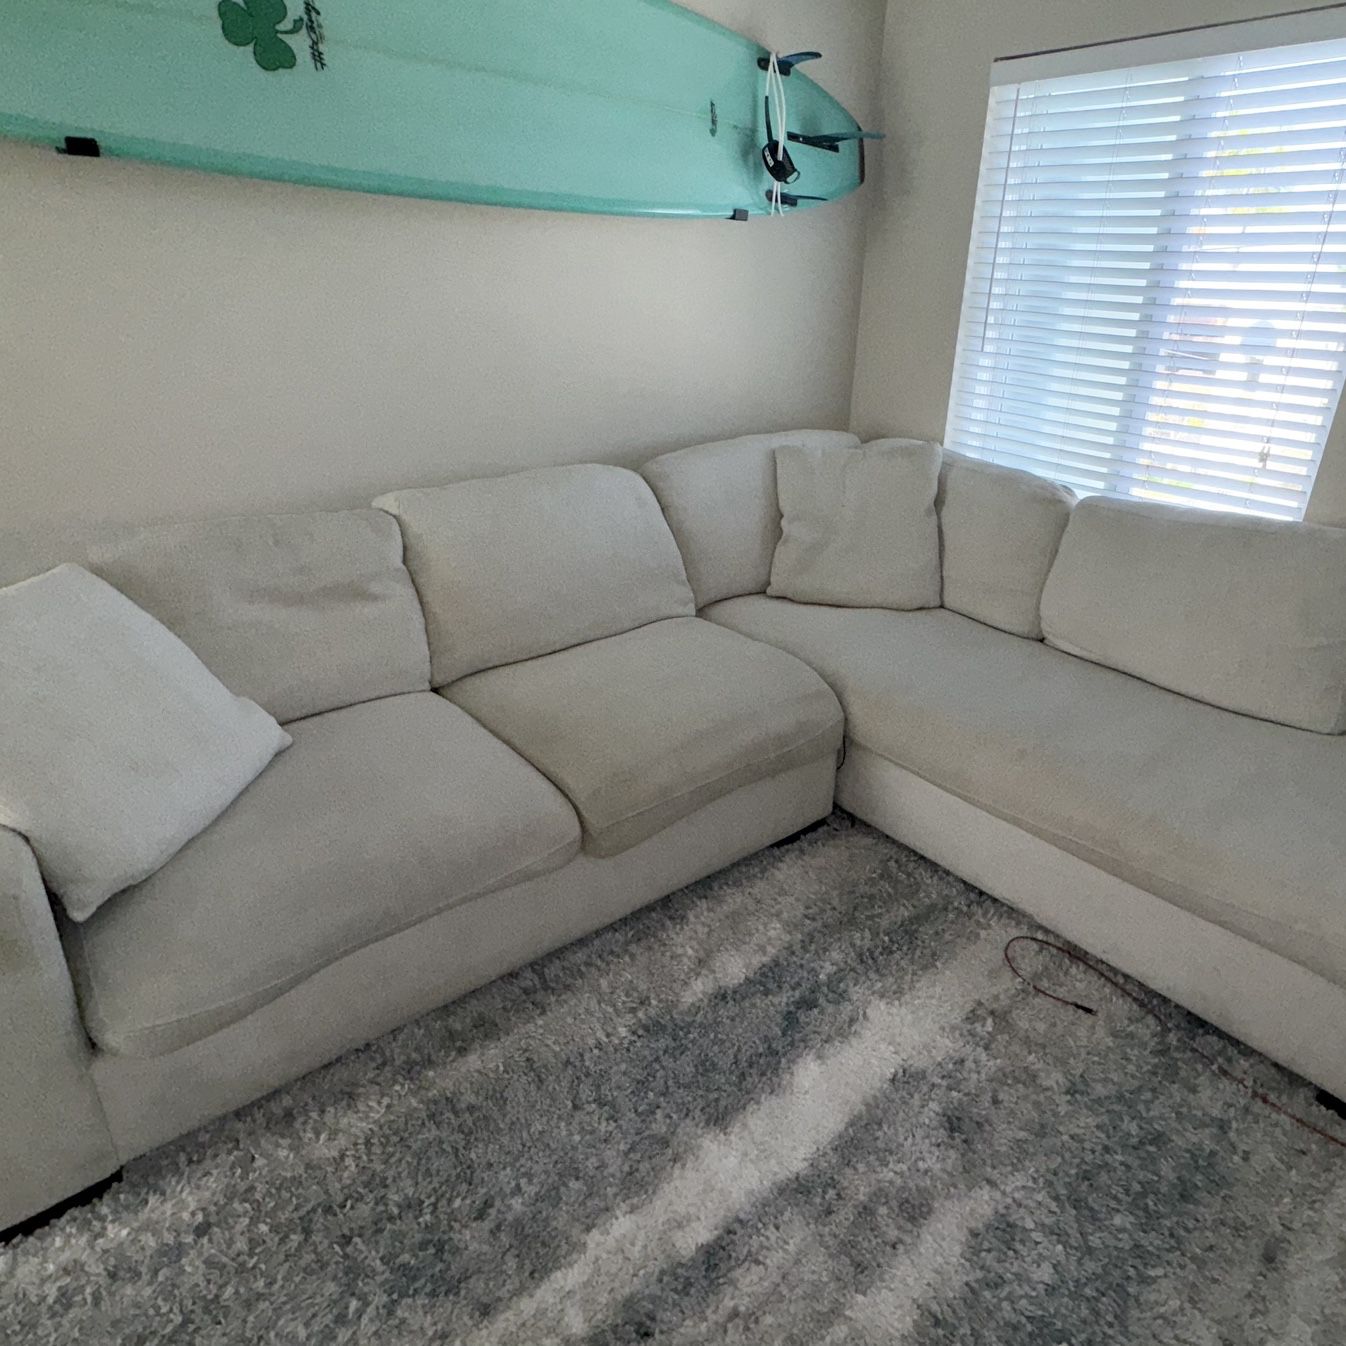 Comfy 2-Piece Sectional Couch - $300 (Negotiable)